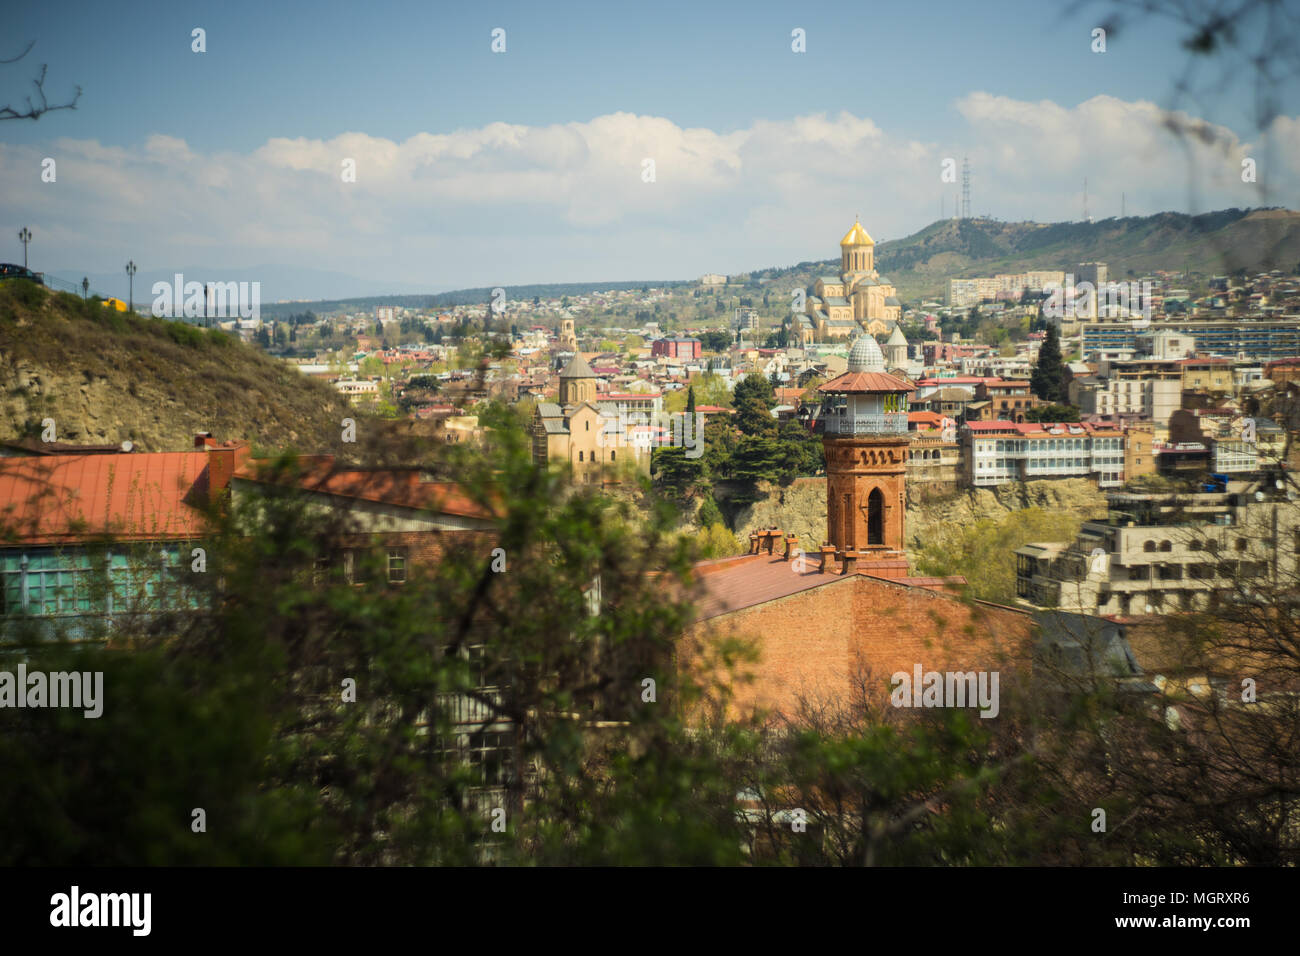 View from Tbilisi botanical garden to Old town with domes of main mosque and cathedrals Stock Photo